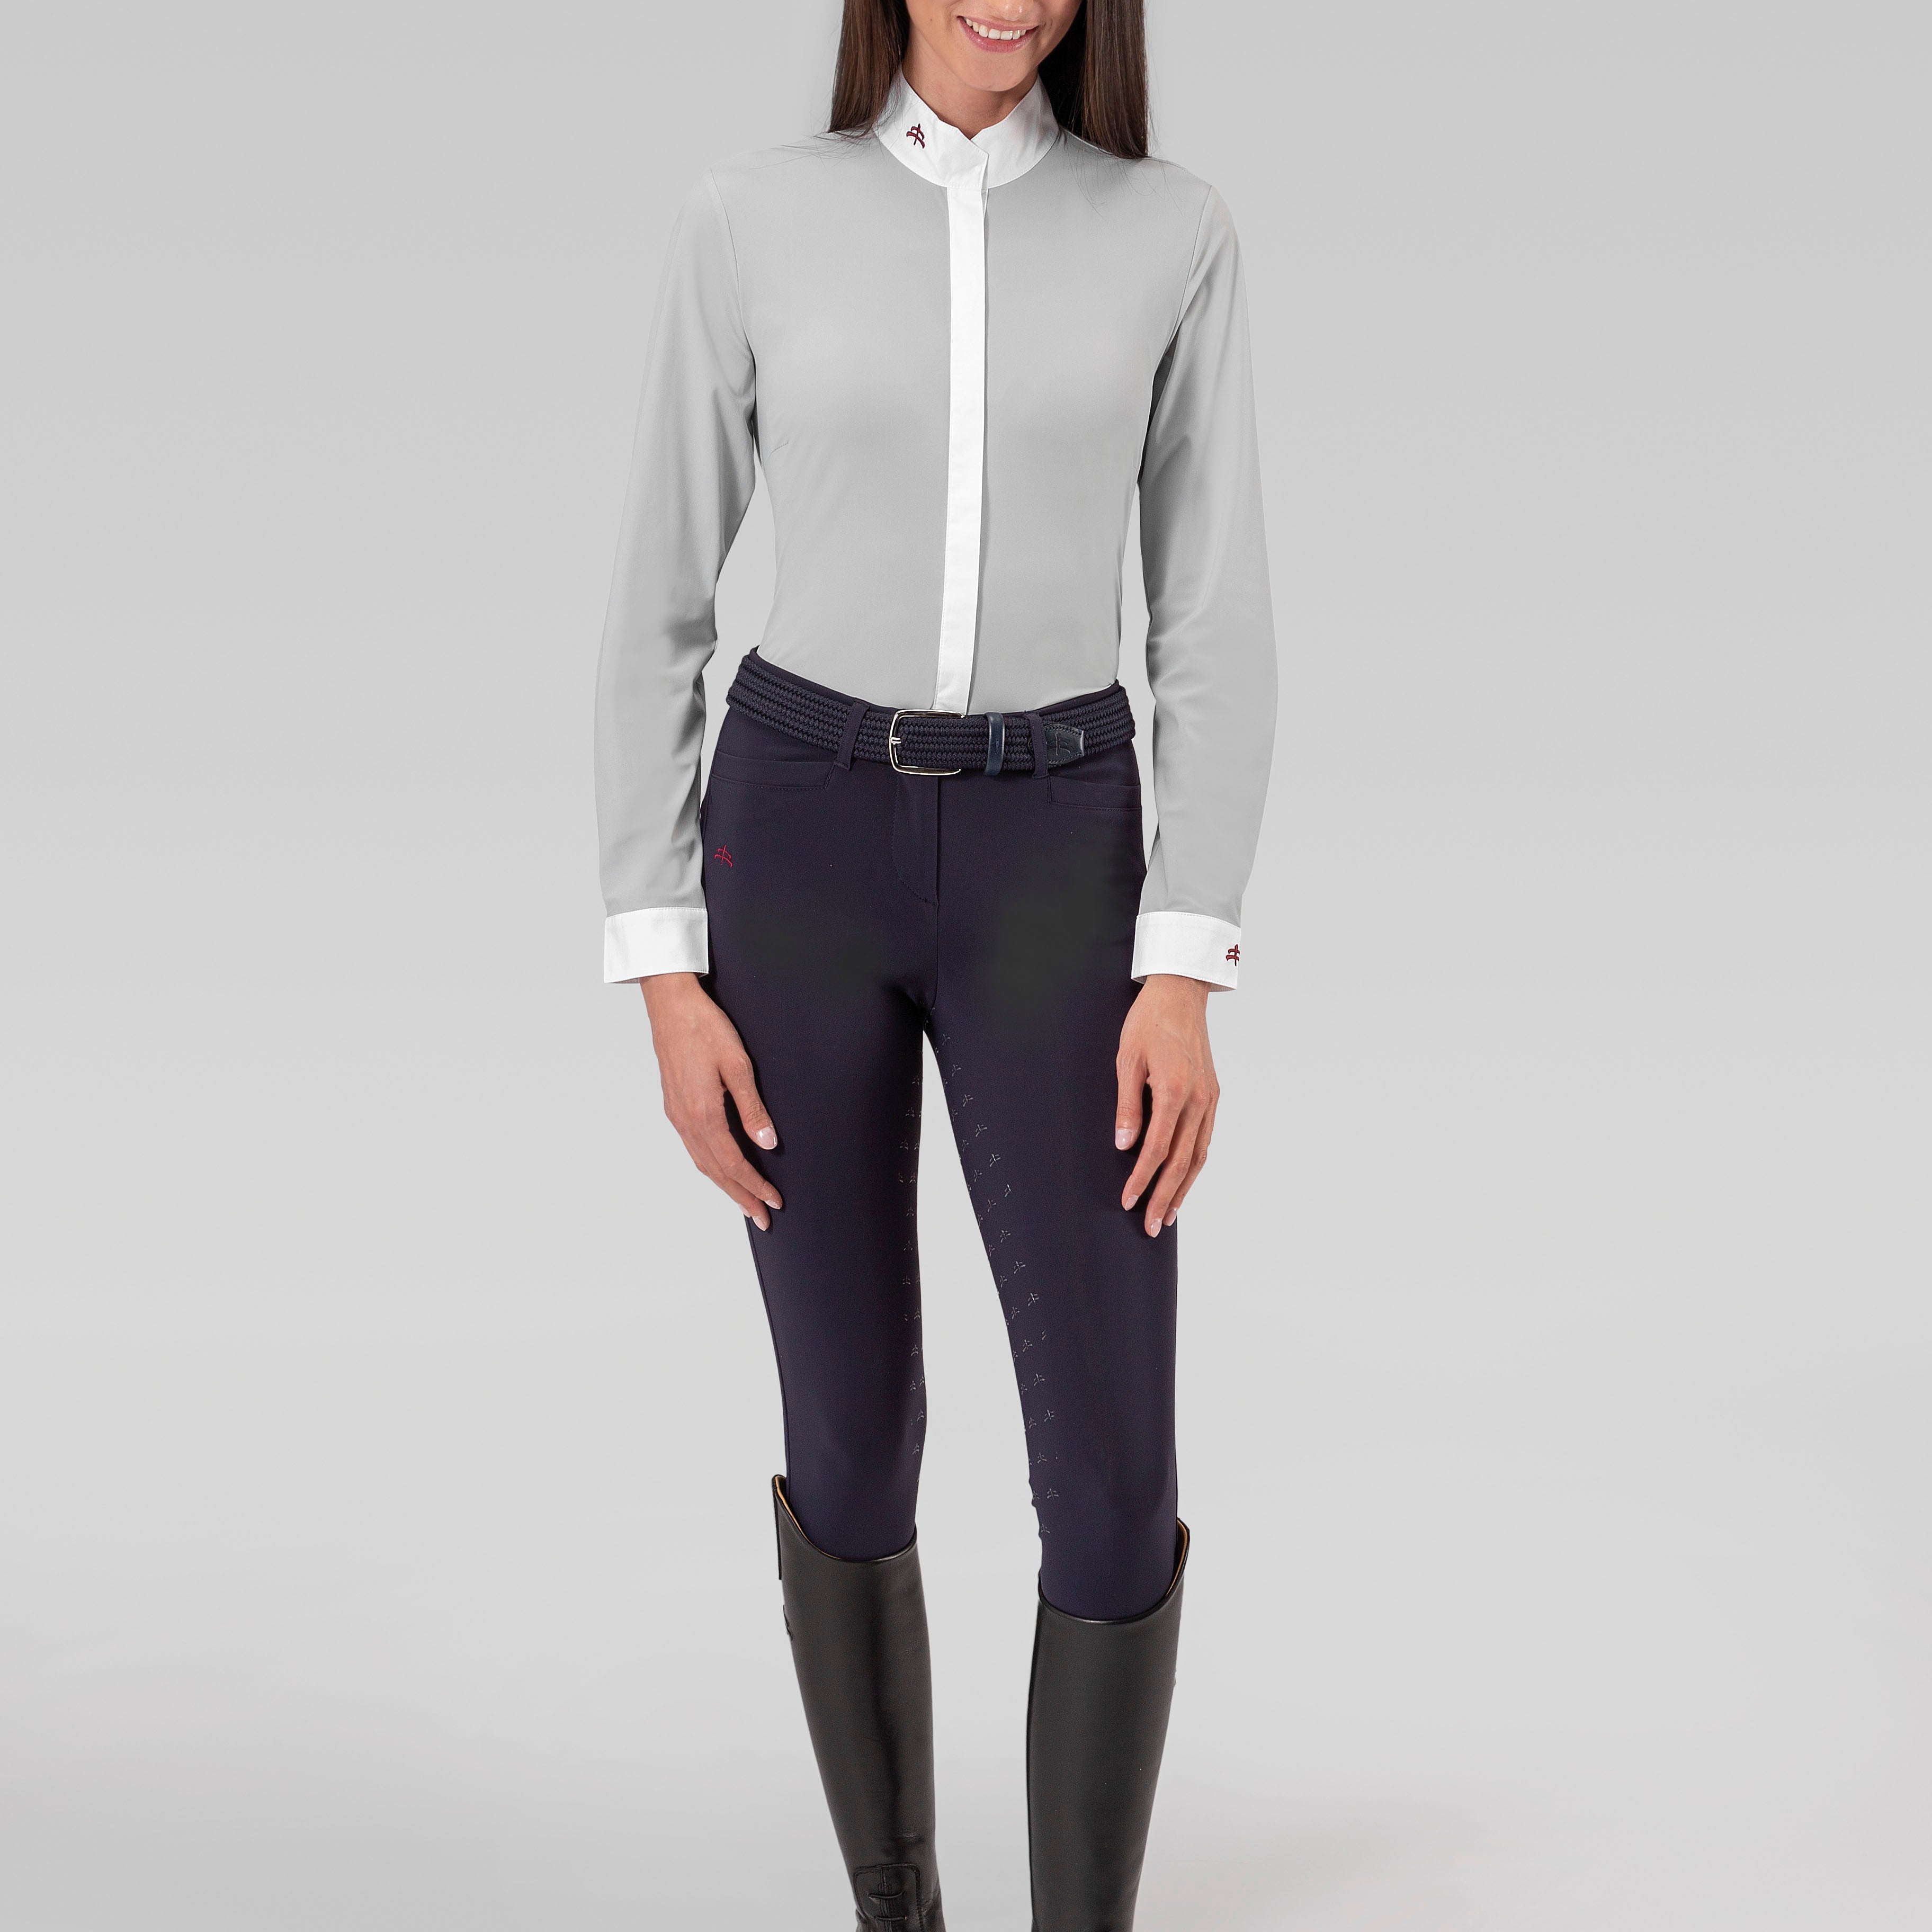 Makebe Italy Ladies breeches Full Seat Silicone Grip Petra Breeches - Equiluxe Tack